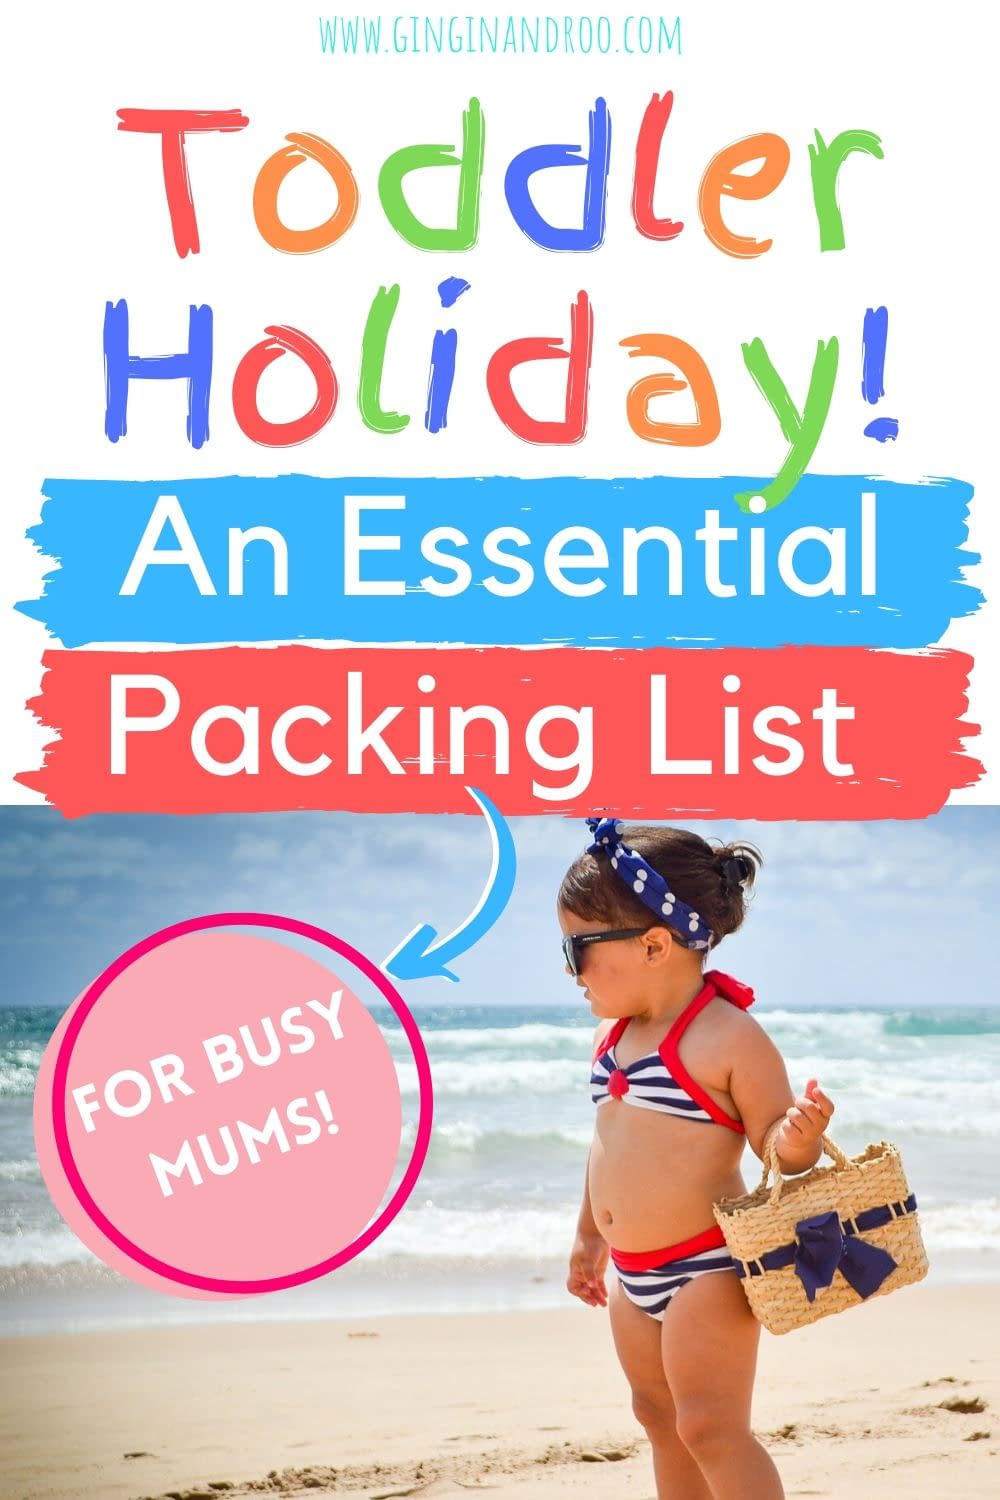 Toddler Holiday: An Essential Packing List For Busy Mums by GinGin & Roo #toddlerholiday #toddlerparenting #toddlertips #toddlervacation